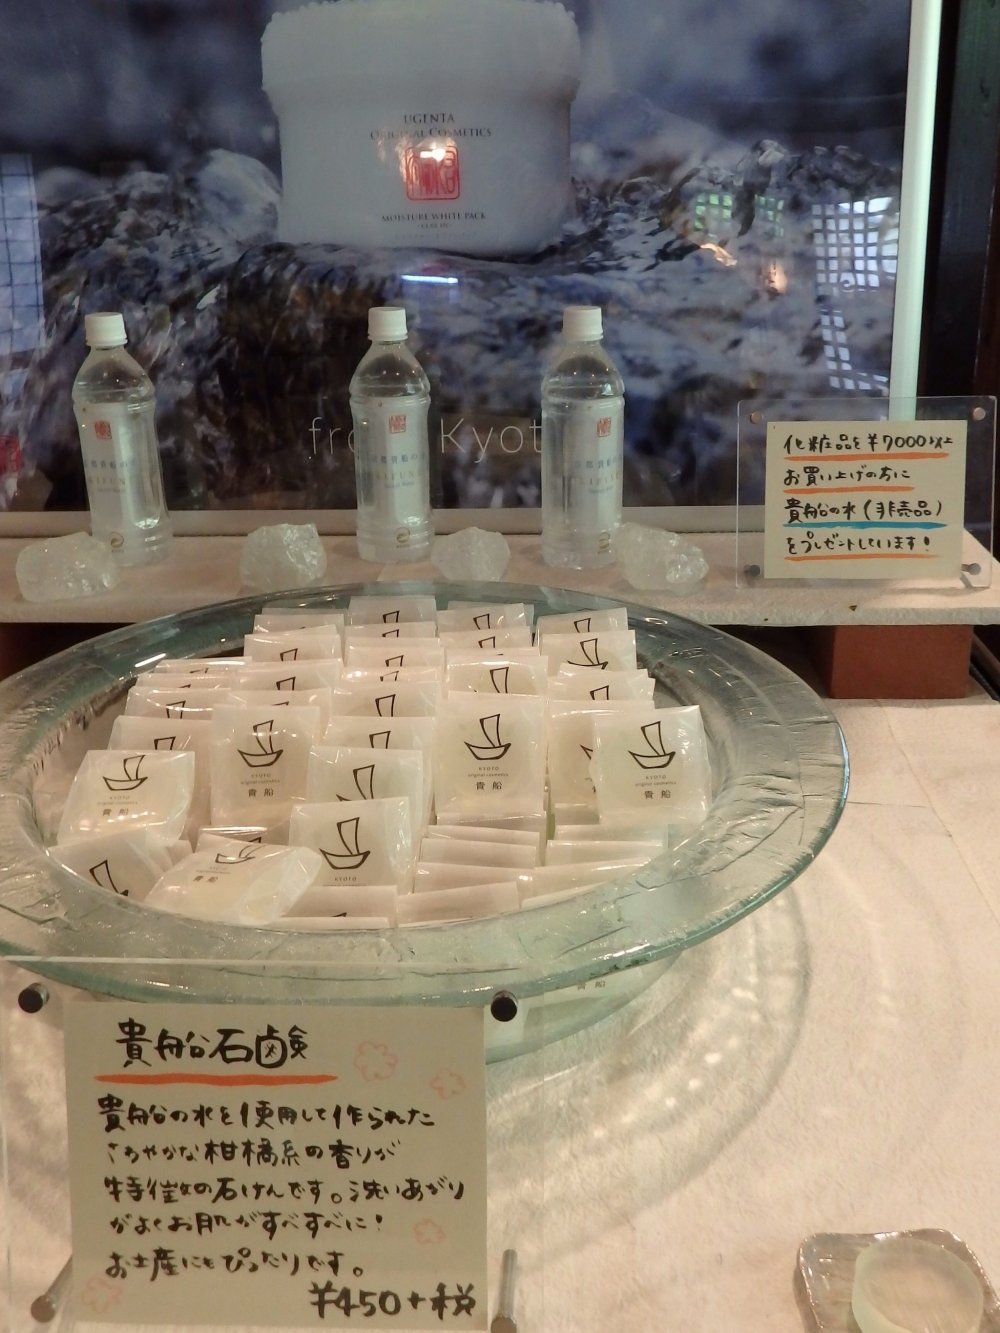 The brand, &#39;Kifune Cosmetics&#39;, includes a variety of products made locally from top quality ingredients including the area&#39;s natural spring water.